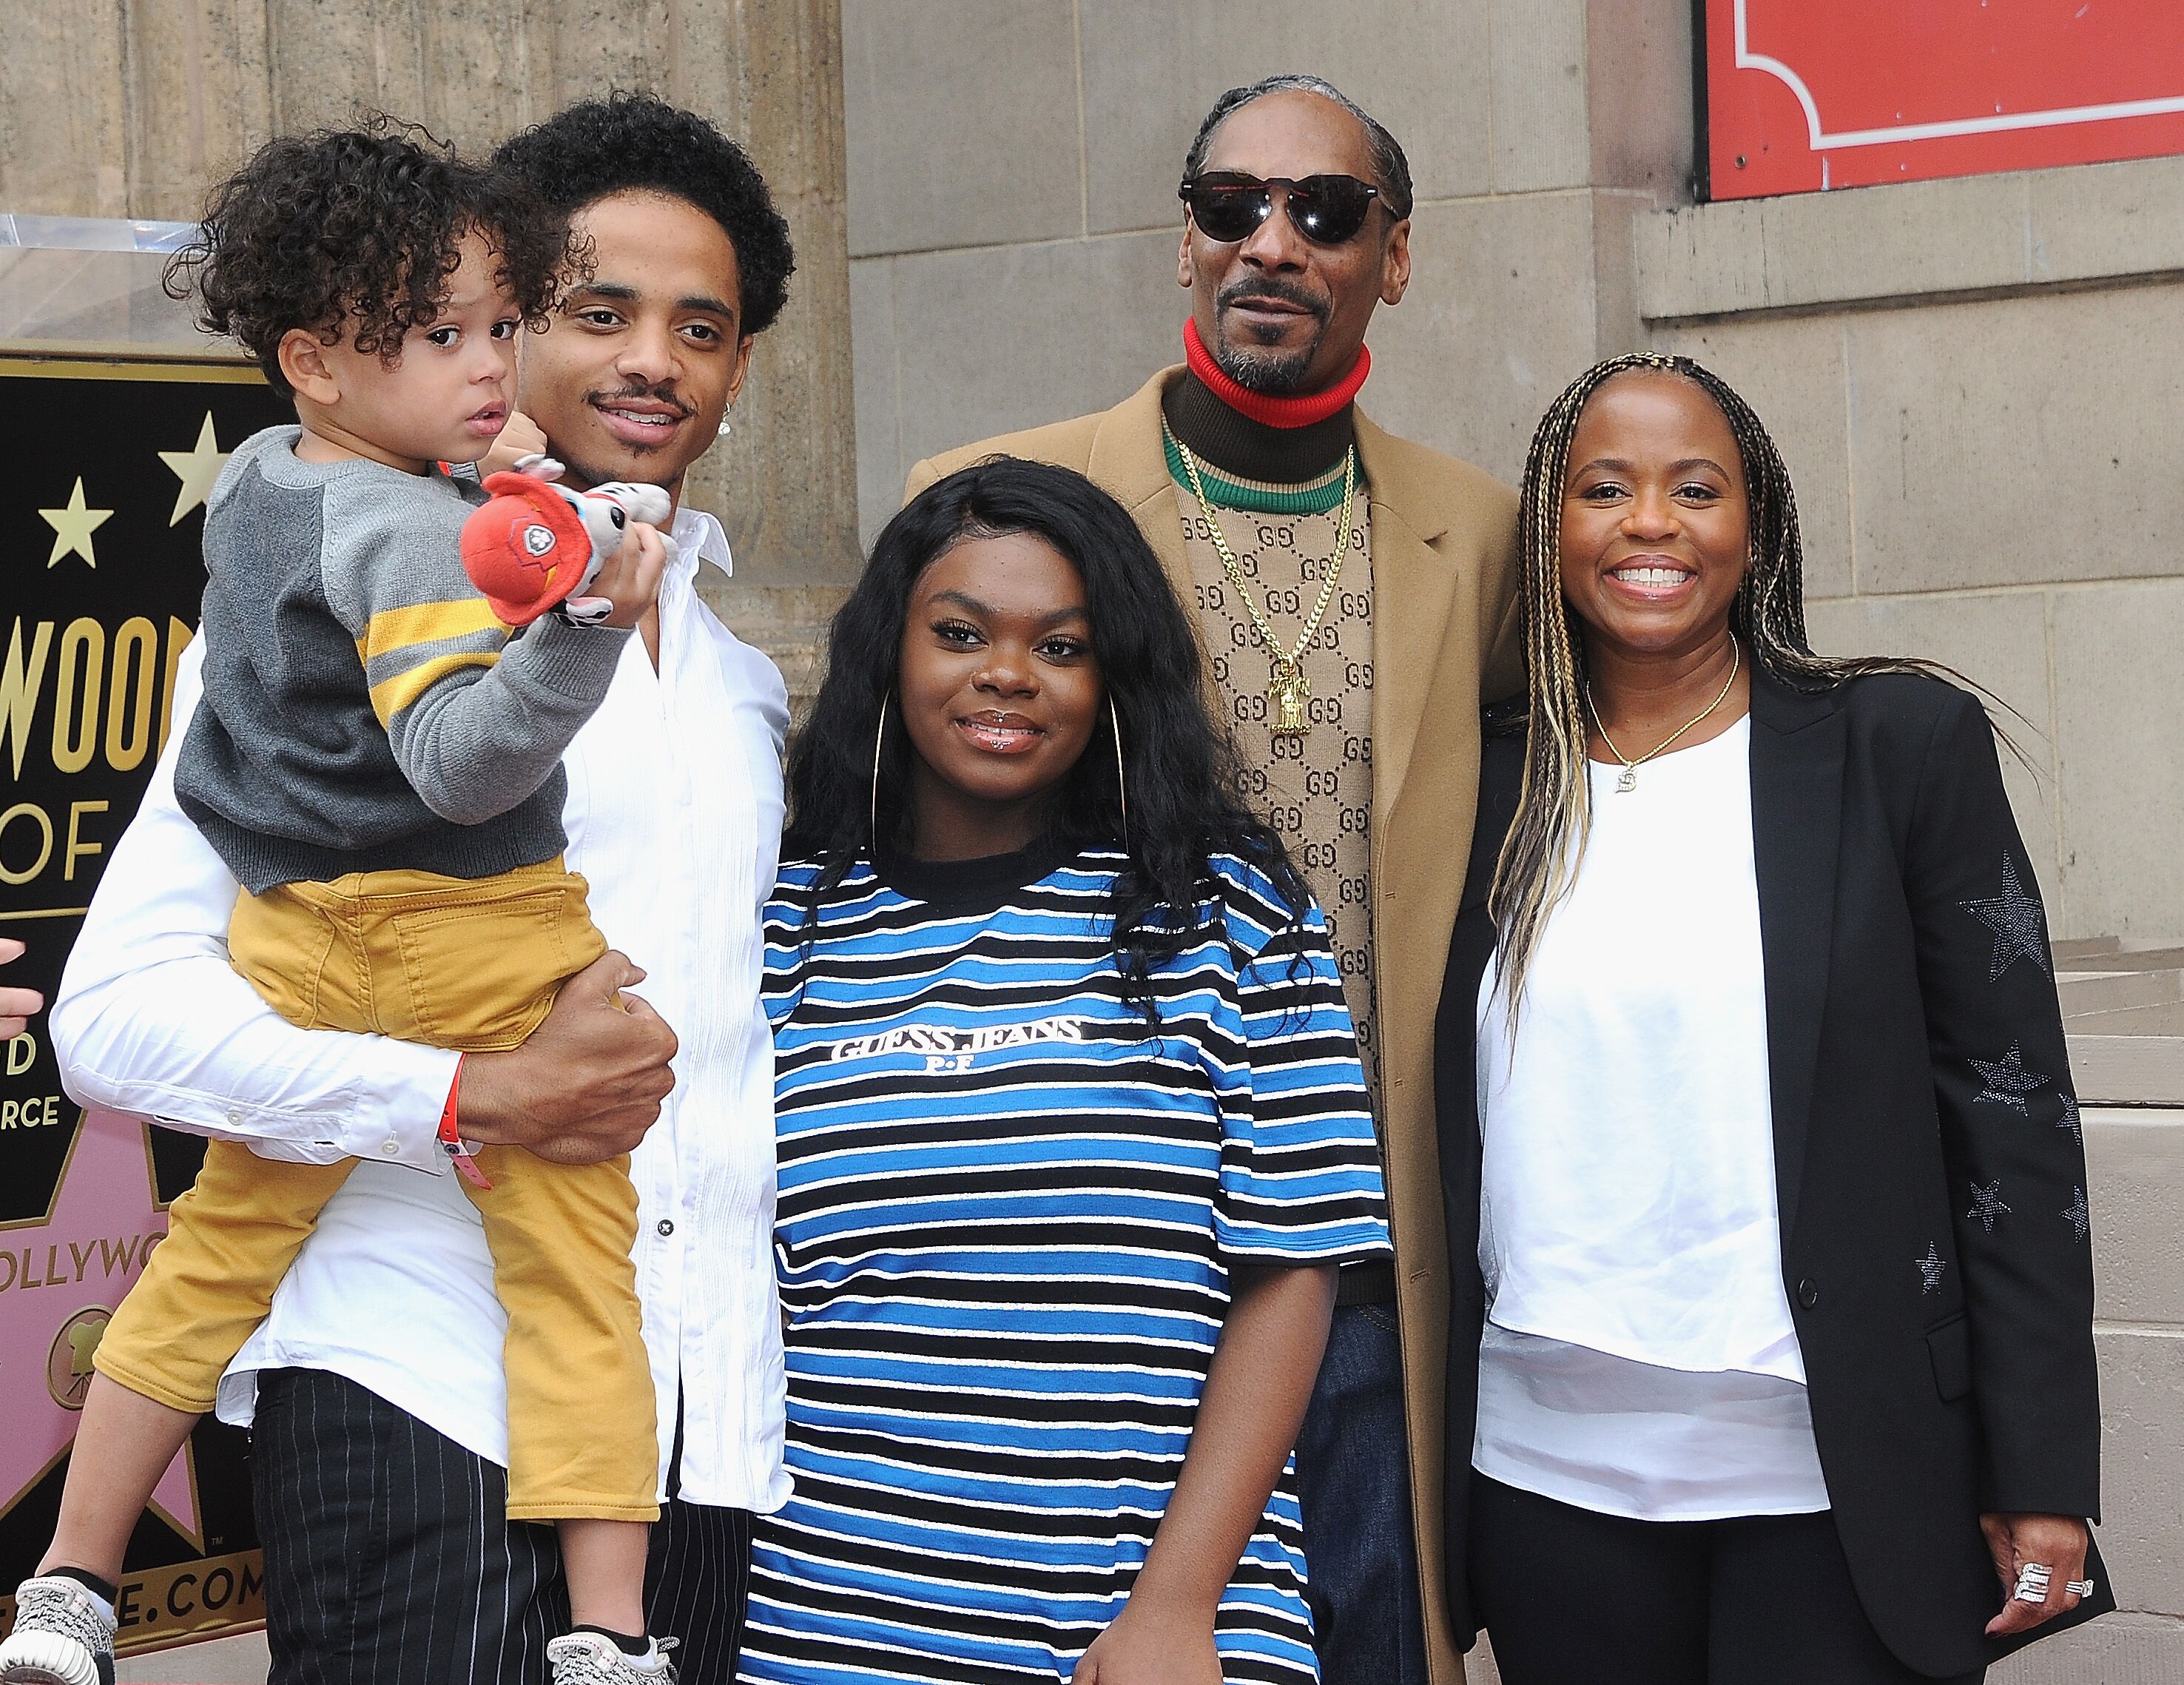 The Broadus family joins Snoop in celebrating his own Hollywood Walk of Fame Star | Source: Getty Images/GlobalImagesUkraine